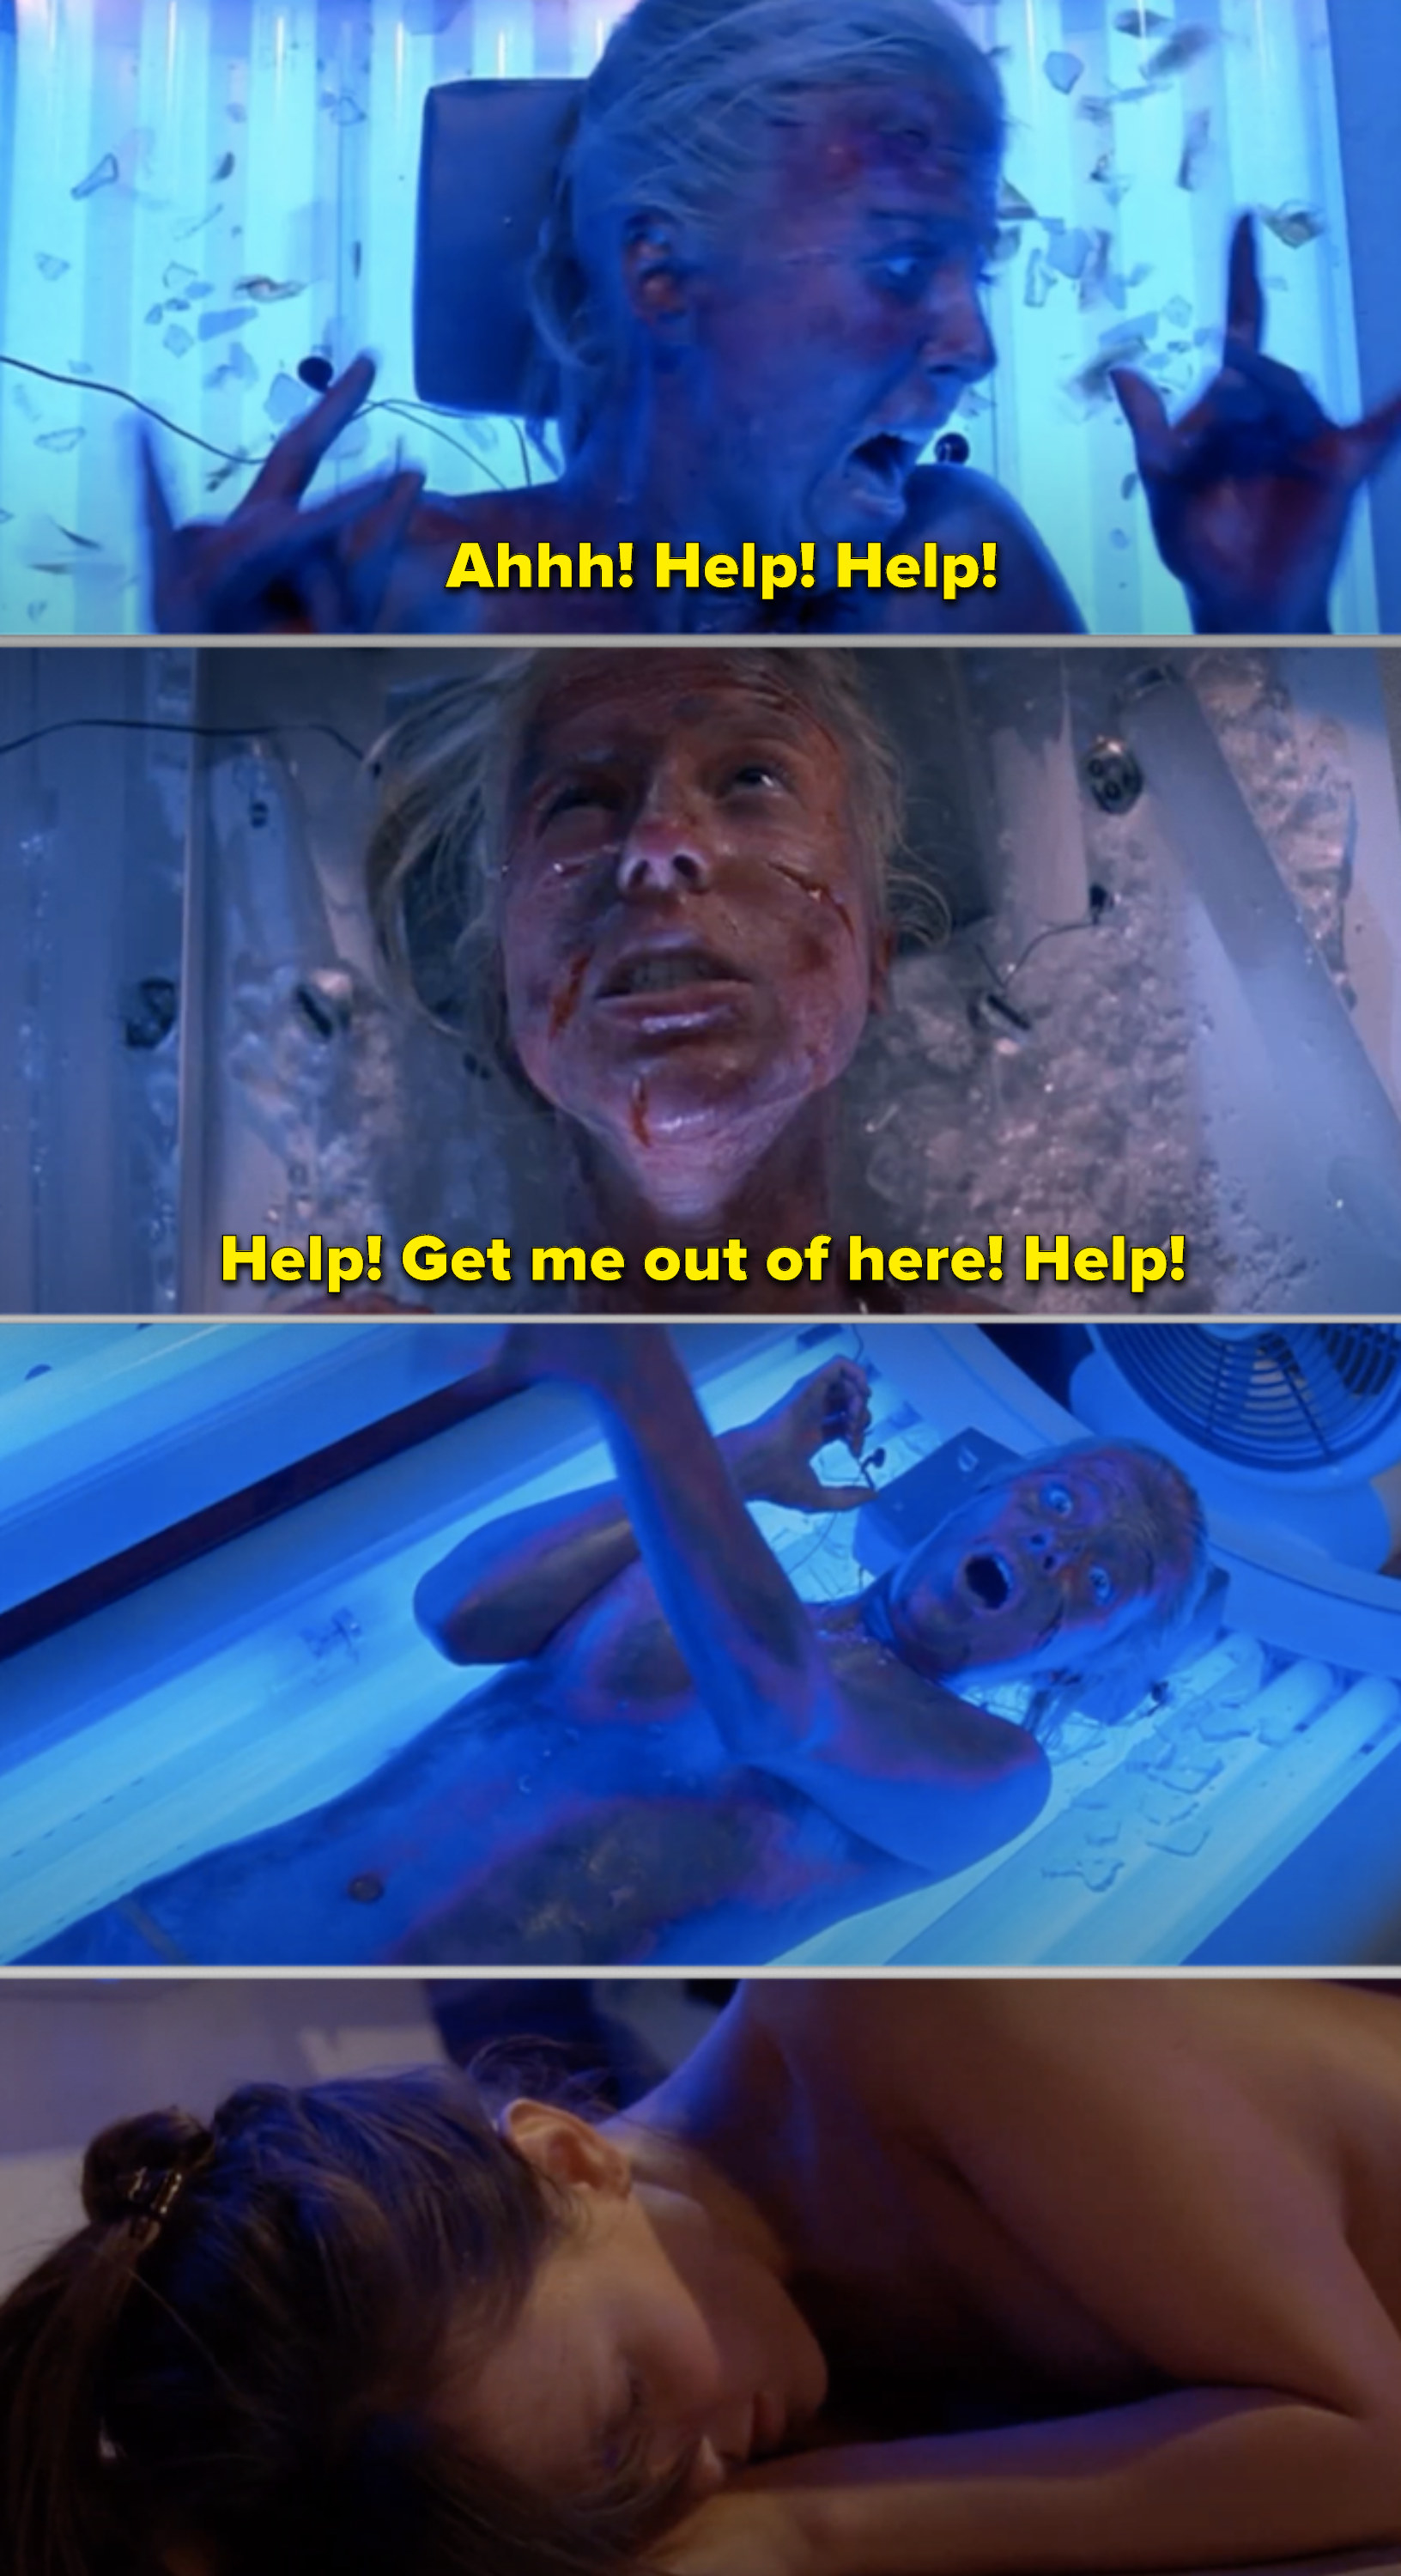 Ashlyn being burned alive while stuck in the tanning bed